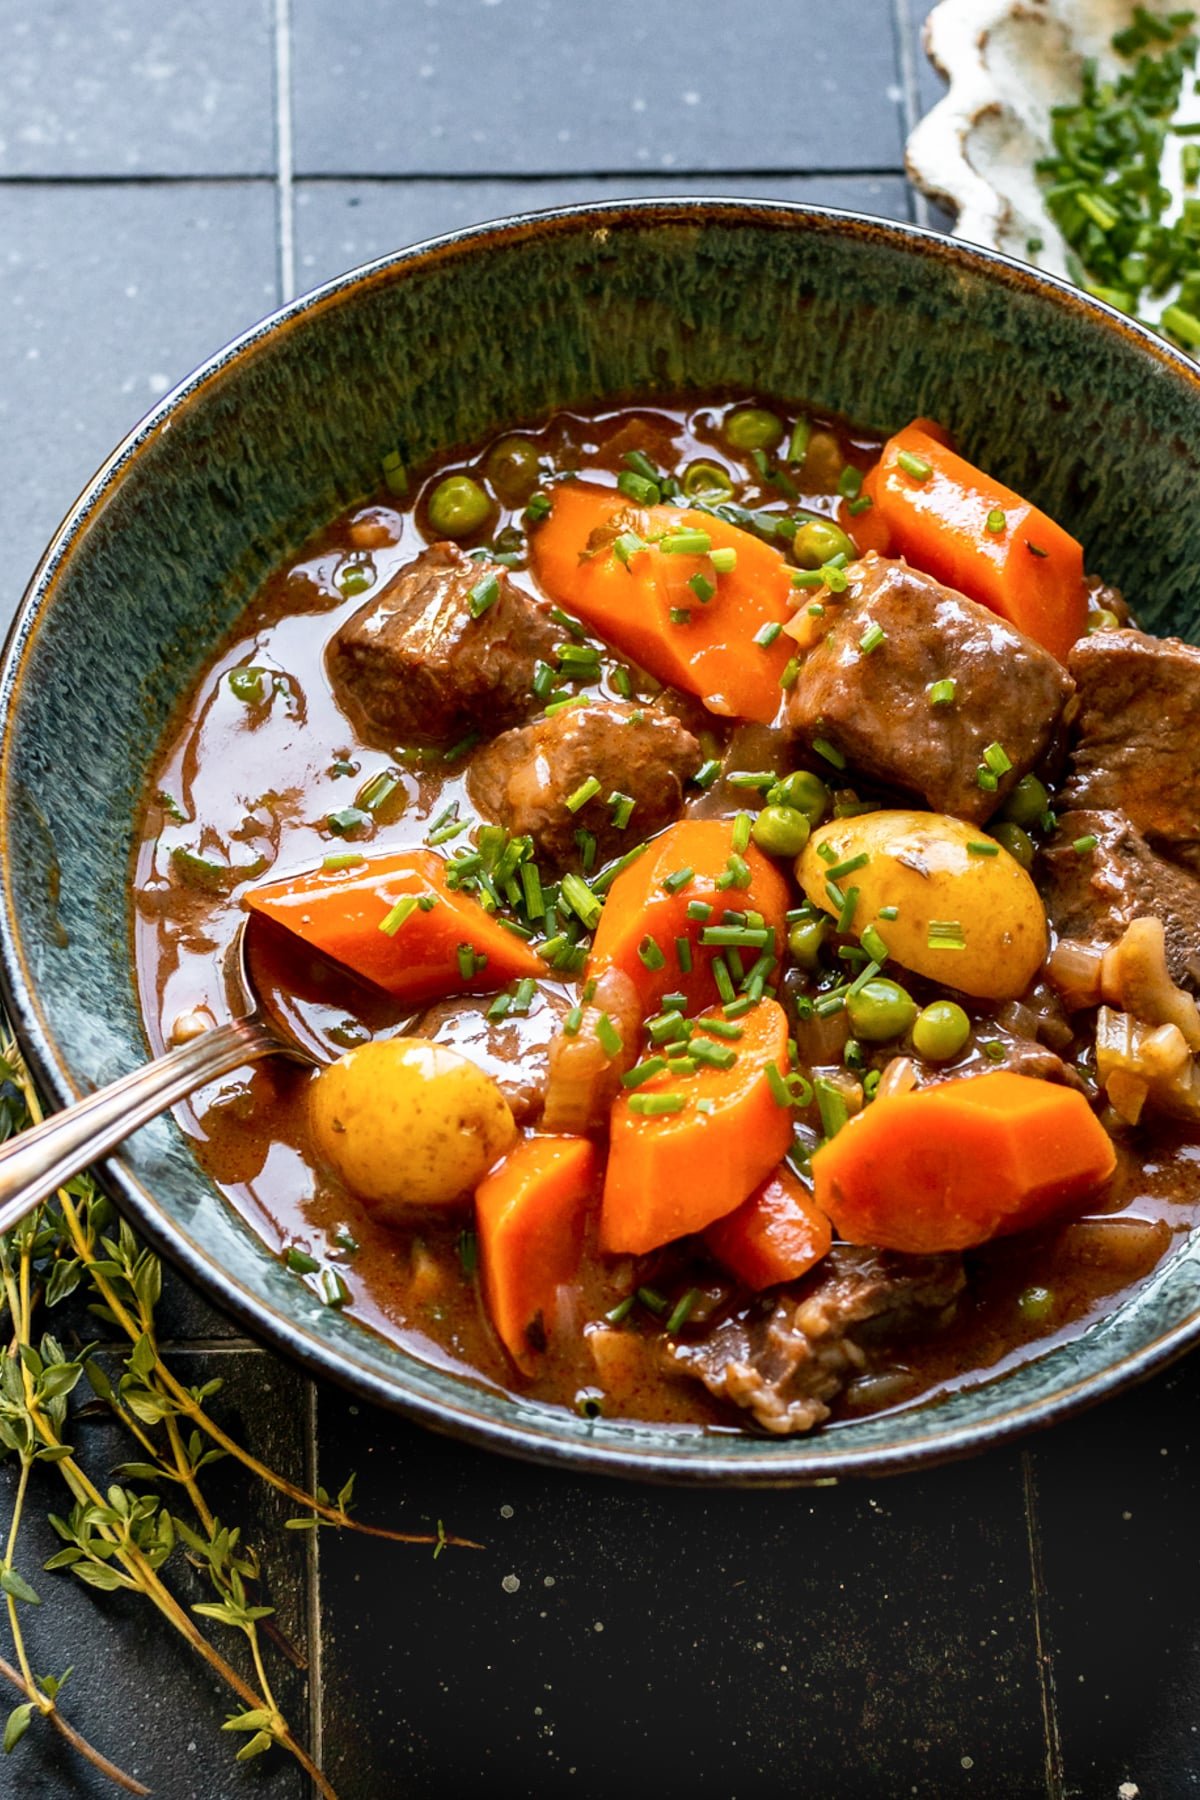 stew made with beef, potatoes and carrots in a blue bowl garnished with fresh chopped chives.